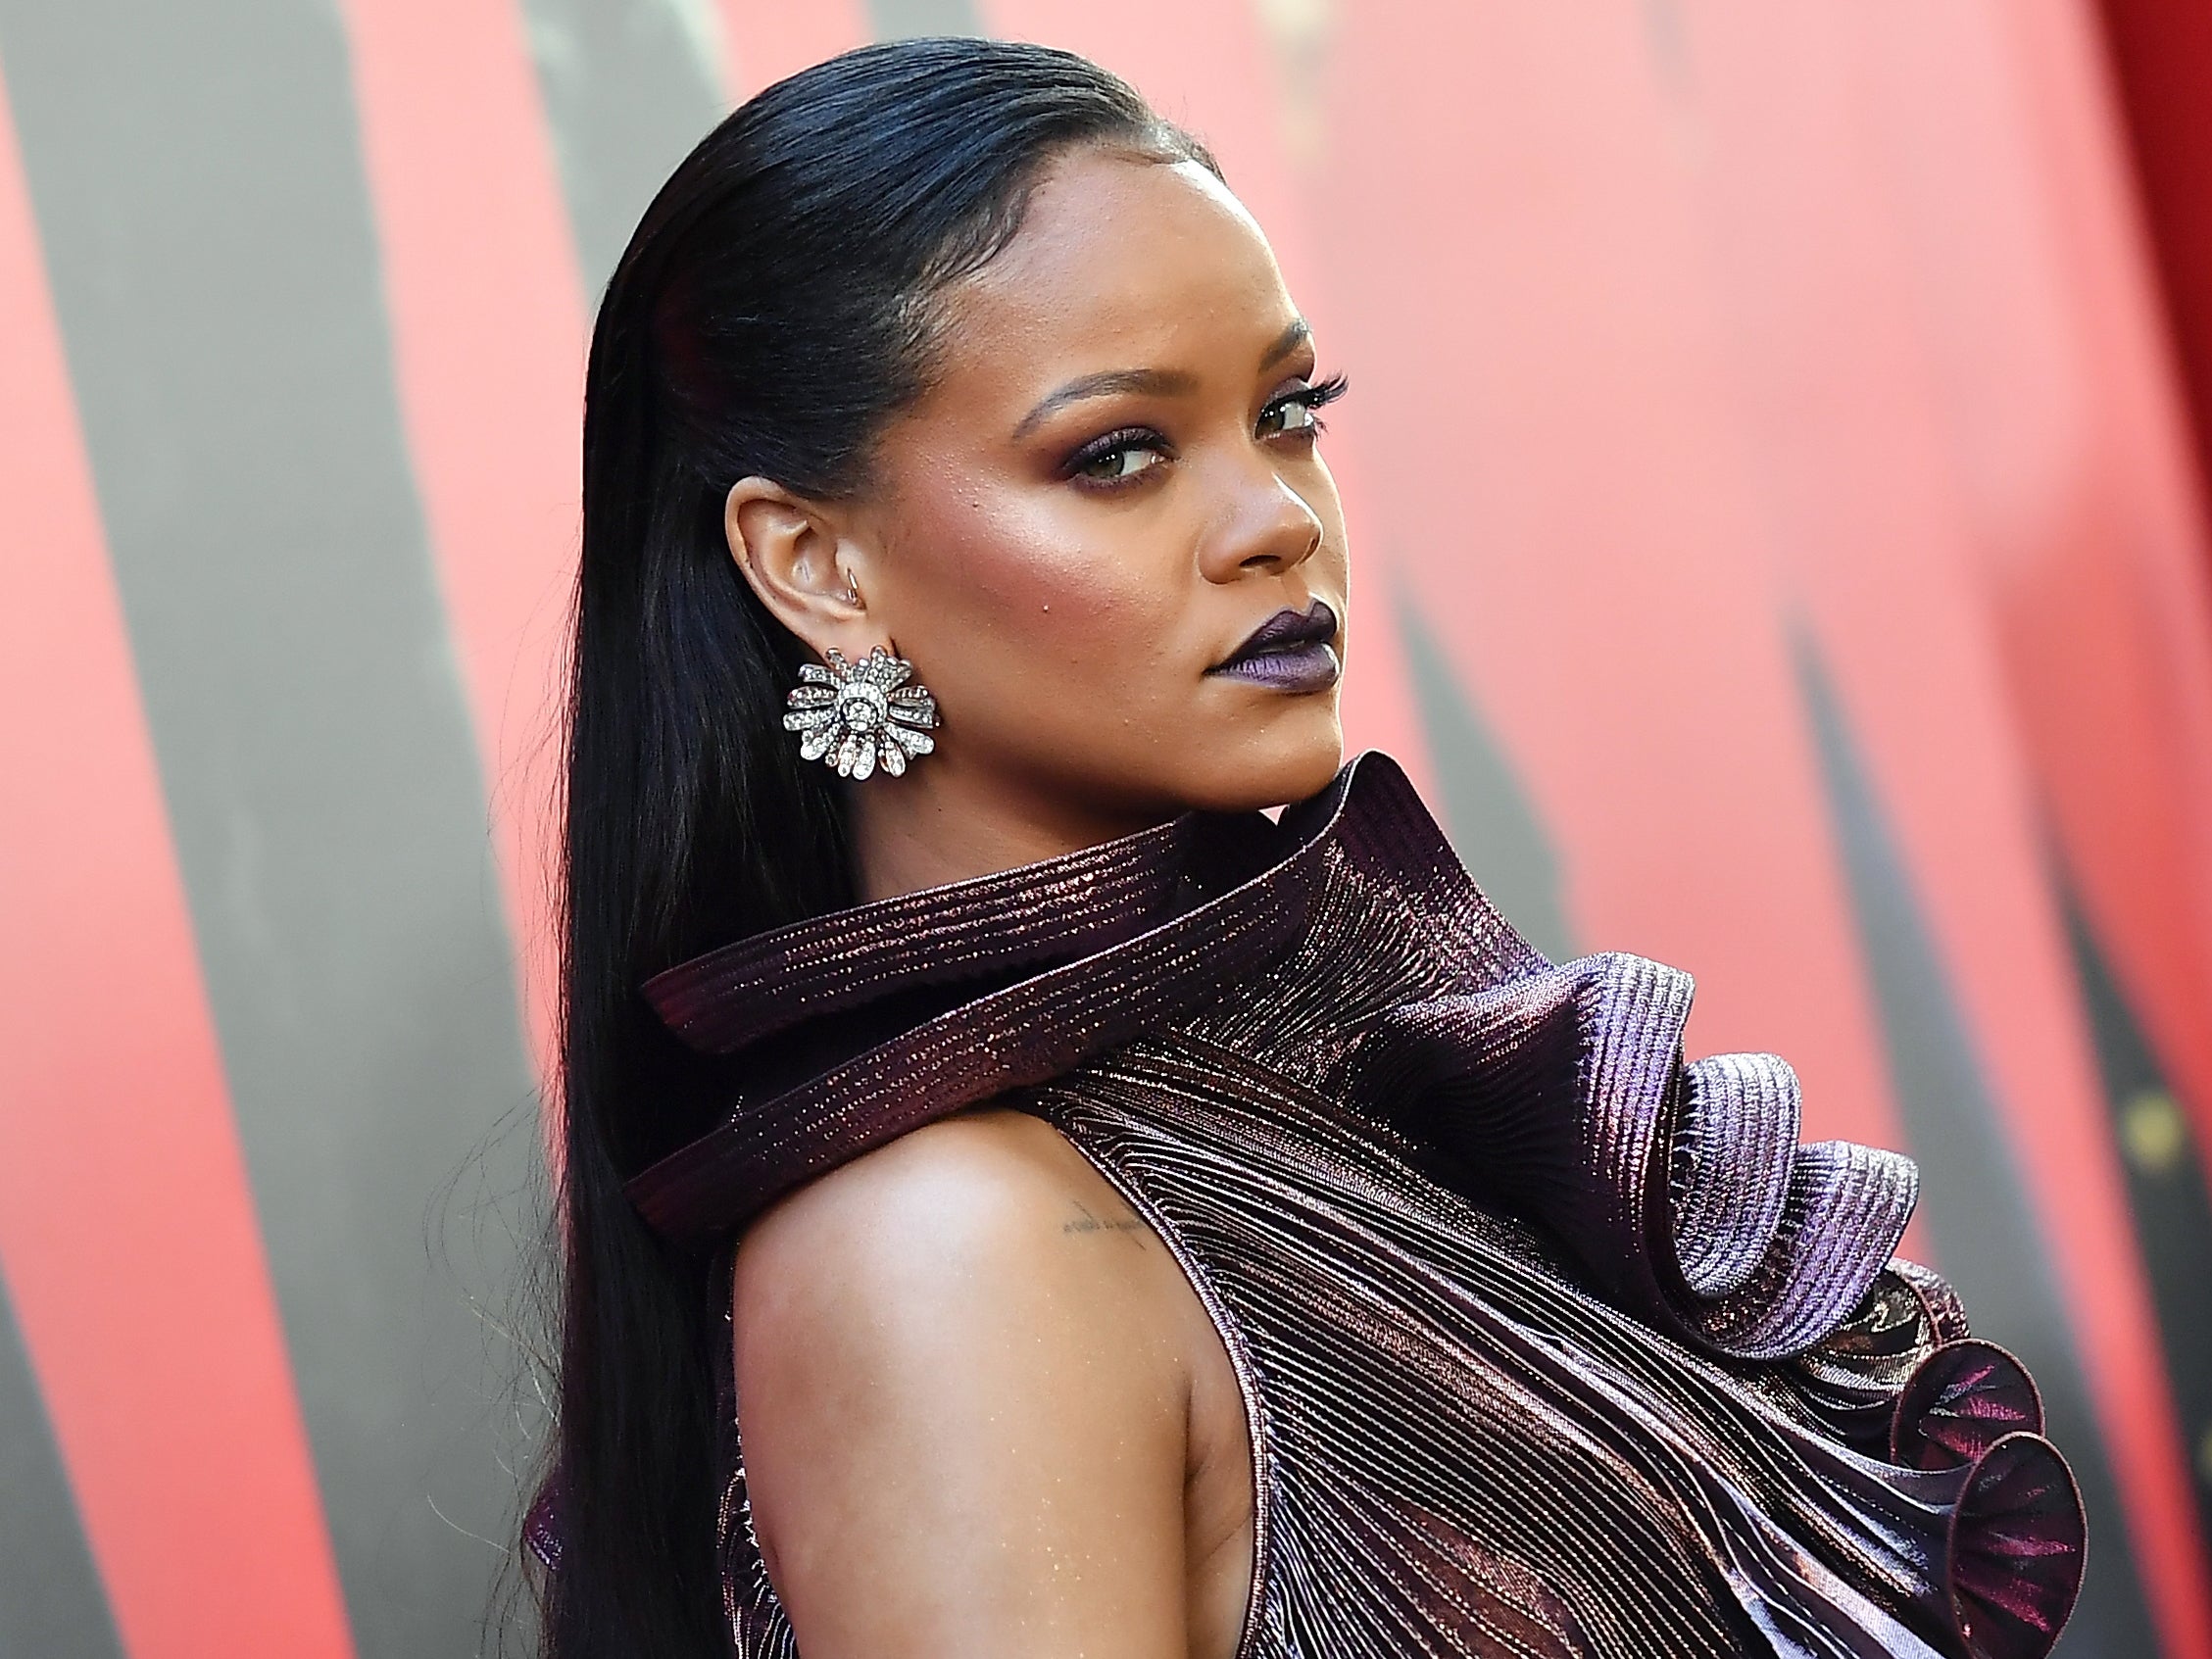 Fenty! Rihanna's Fashion Brand With LVMH Makes Her The First Black